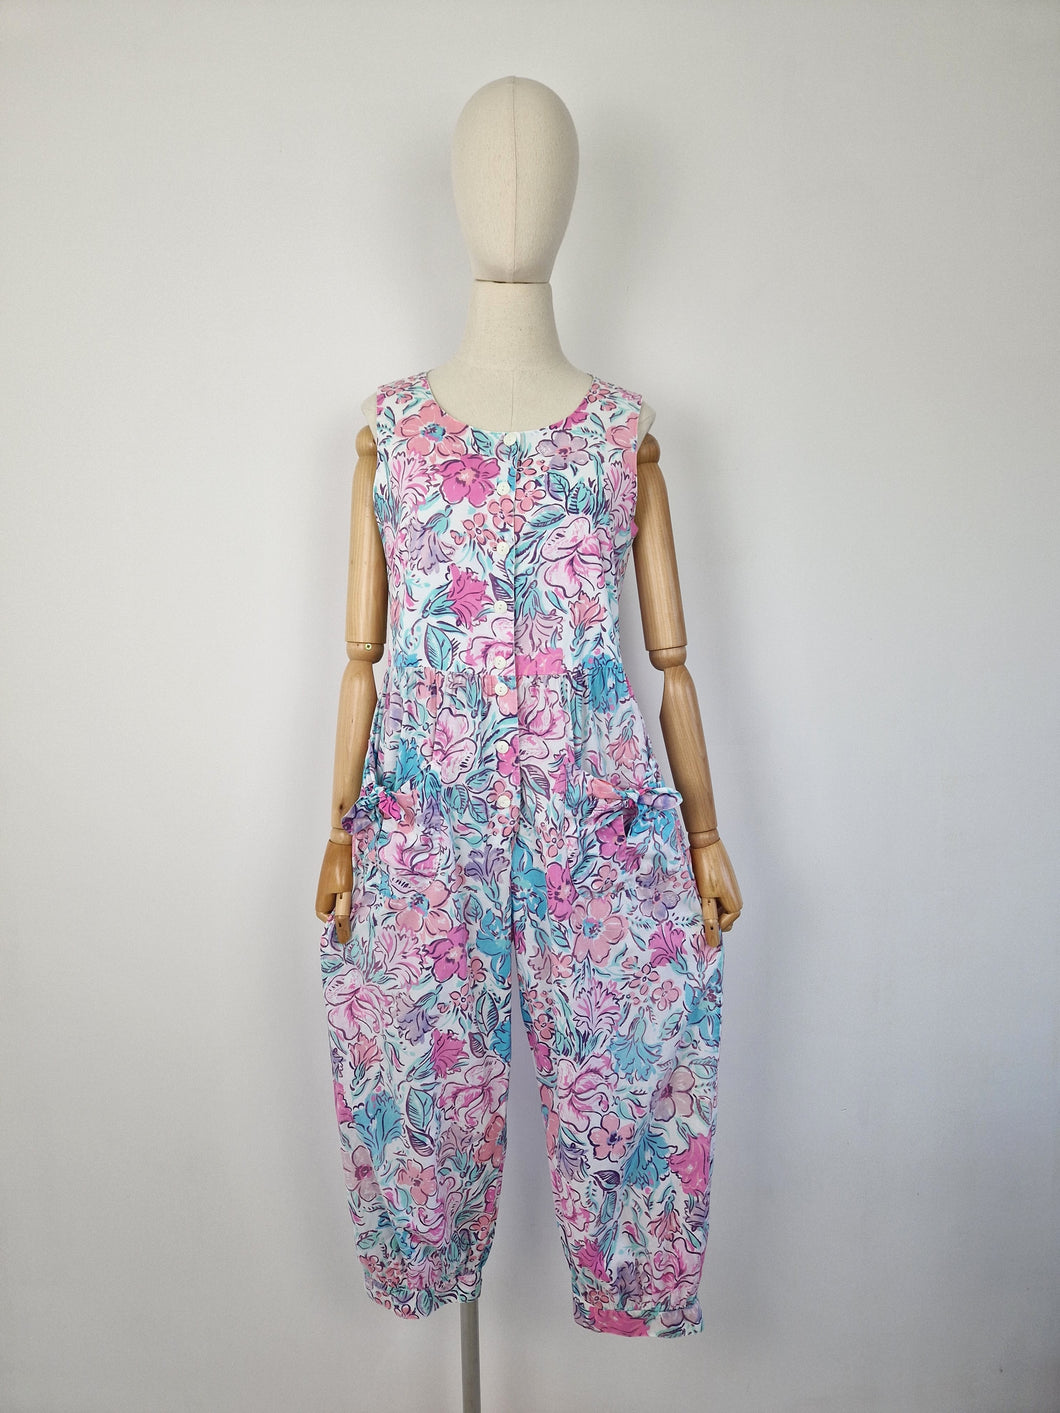 Vintage 80s Laura Ashley rare candy romper